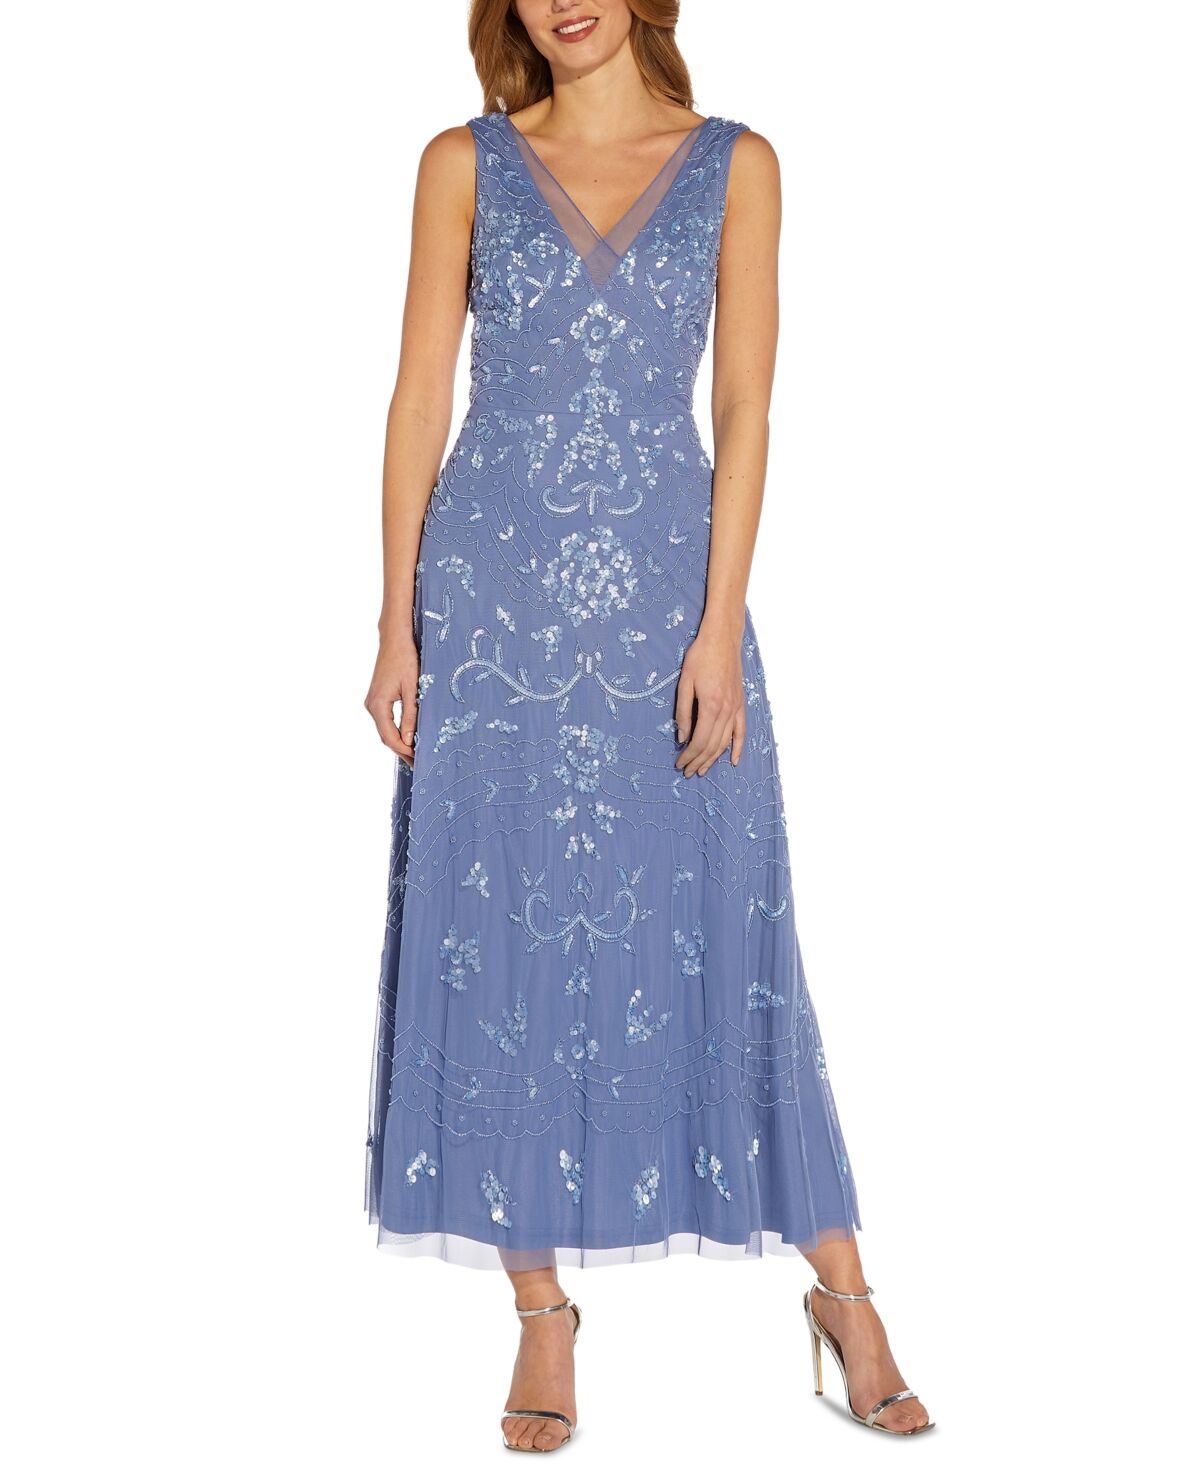 Adrianna Papell Women's Beaded V-Neck Party Dress - French Blue